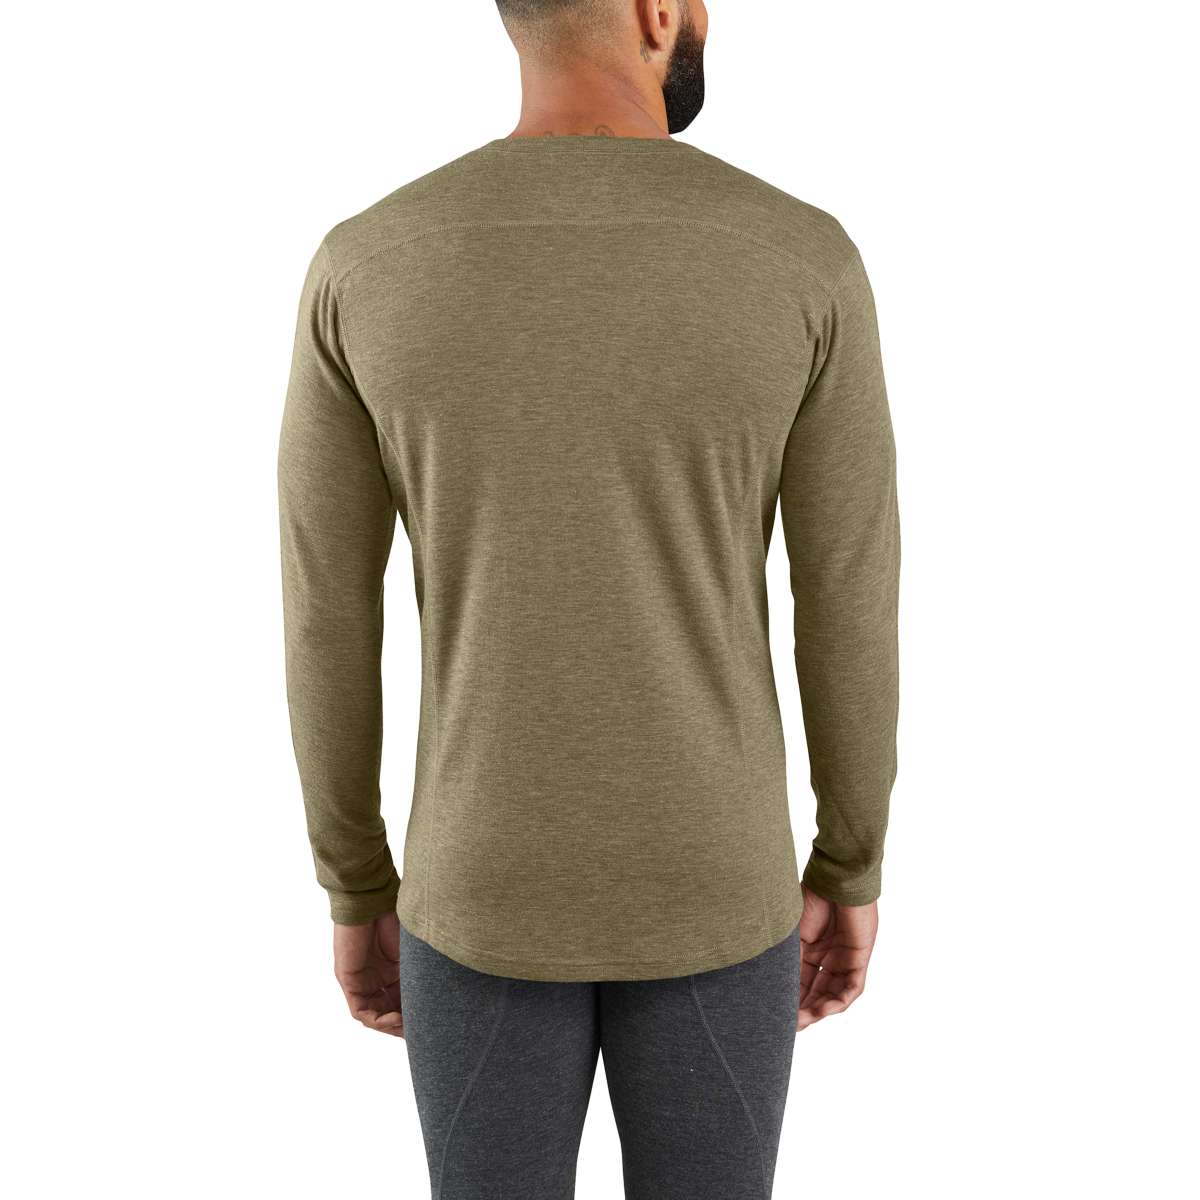  Carhartt Men's Force Midweight Synthetic-Wool Blend